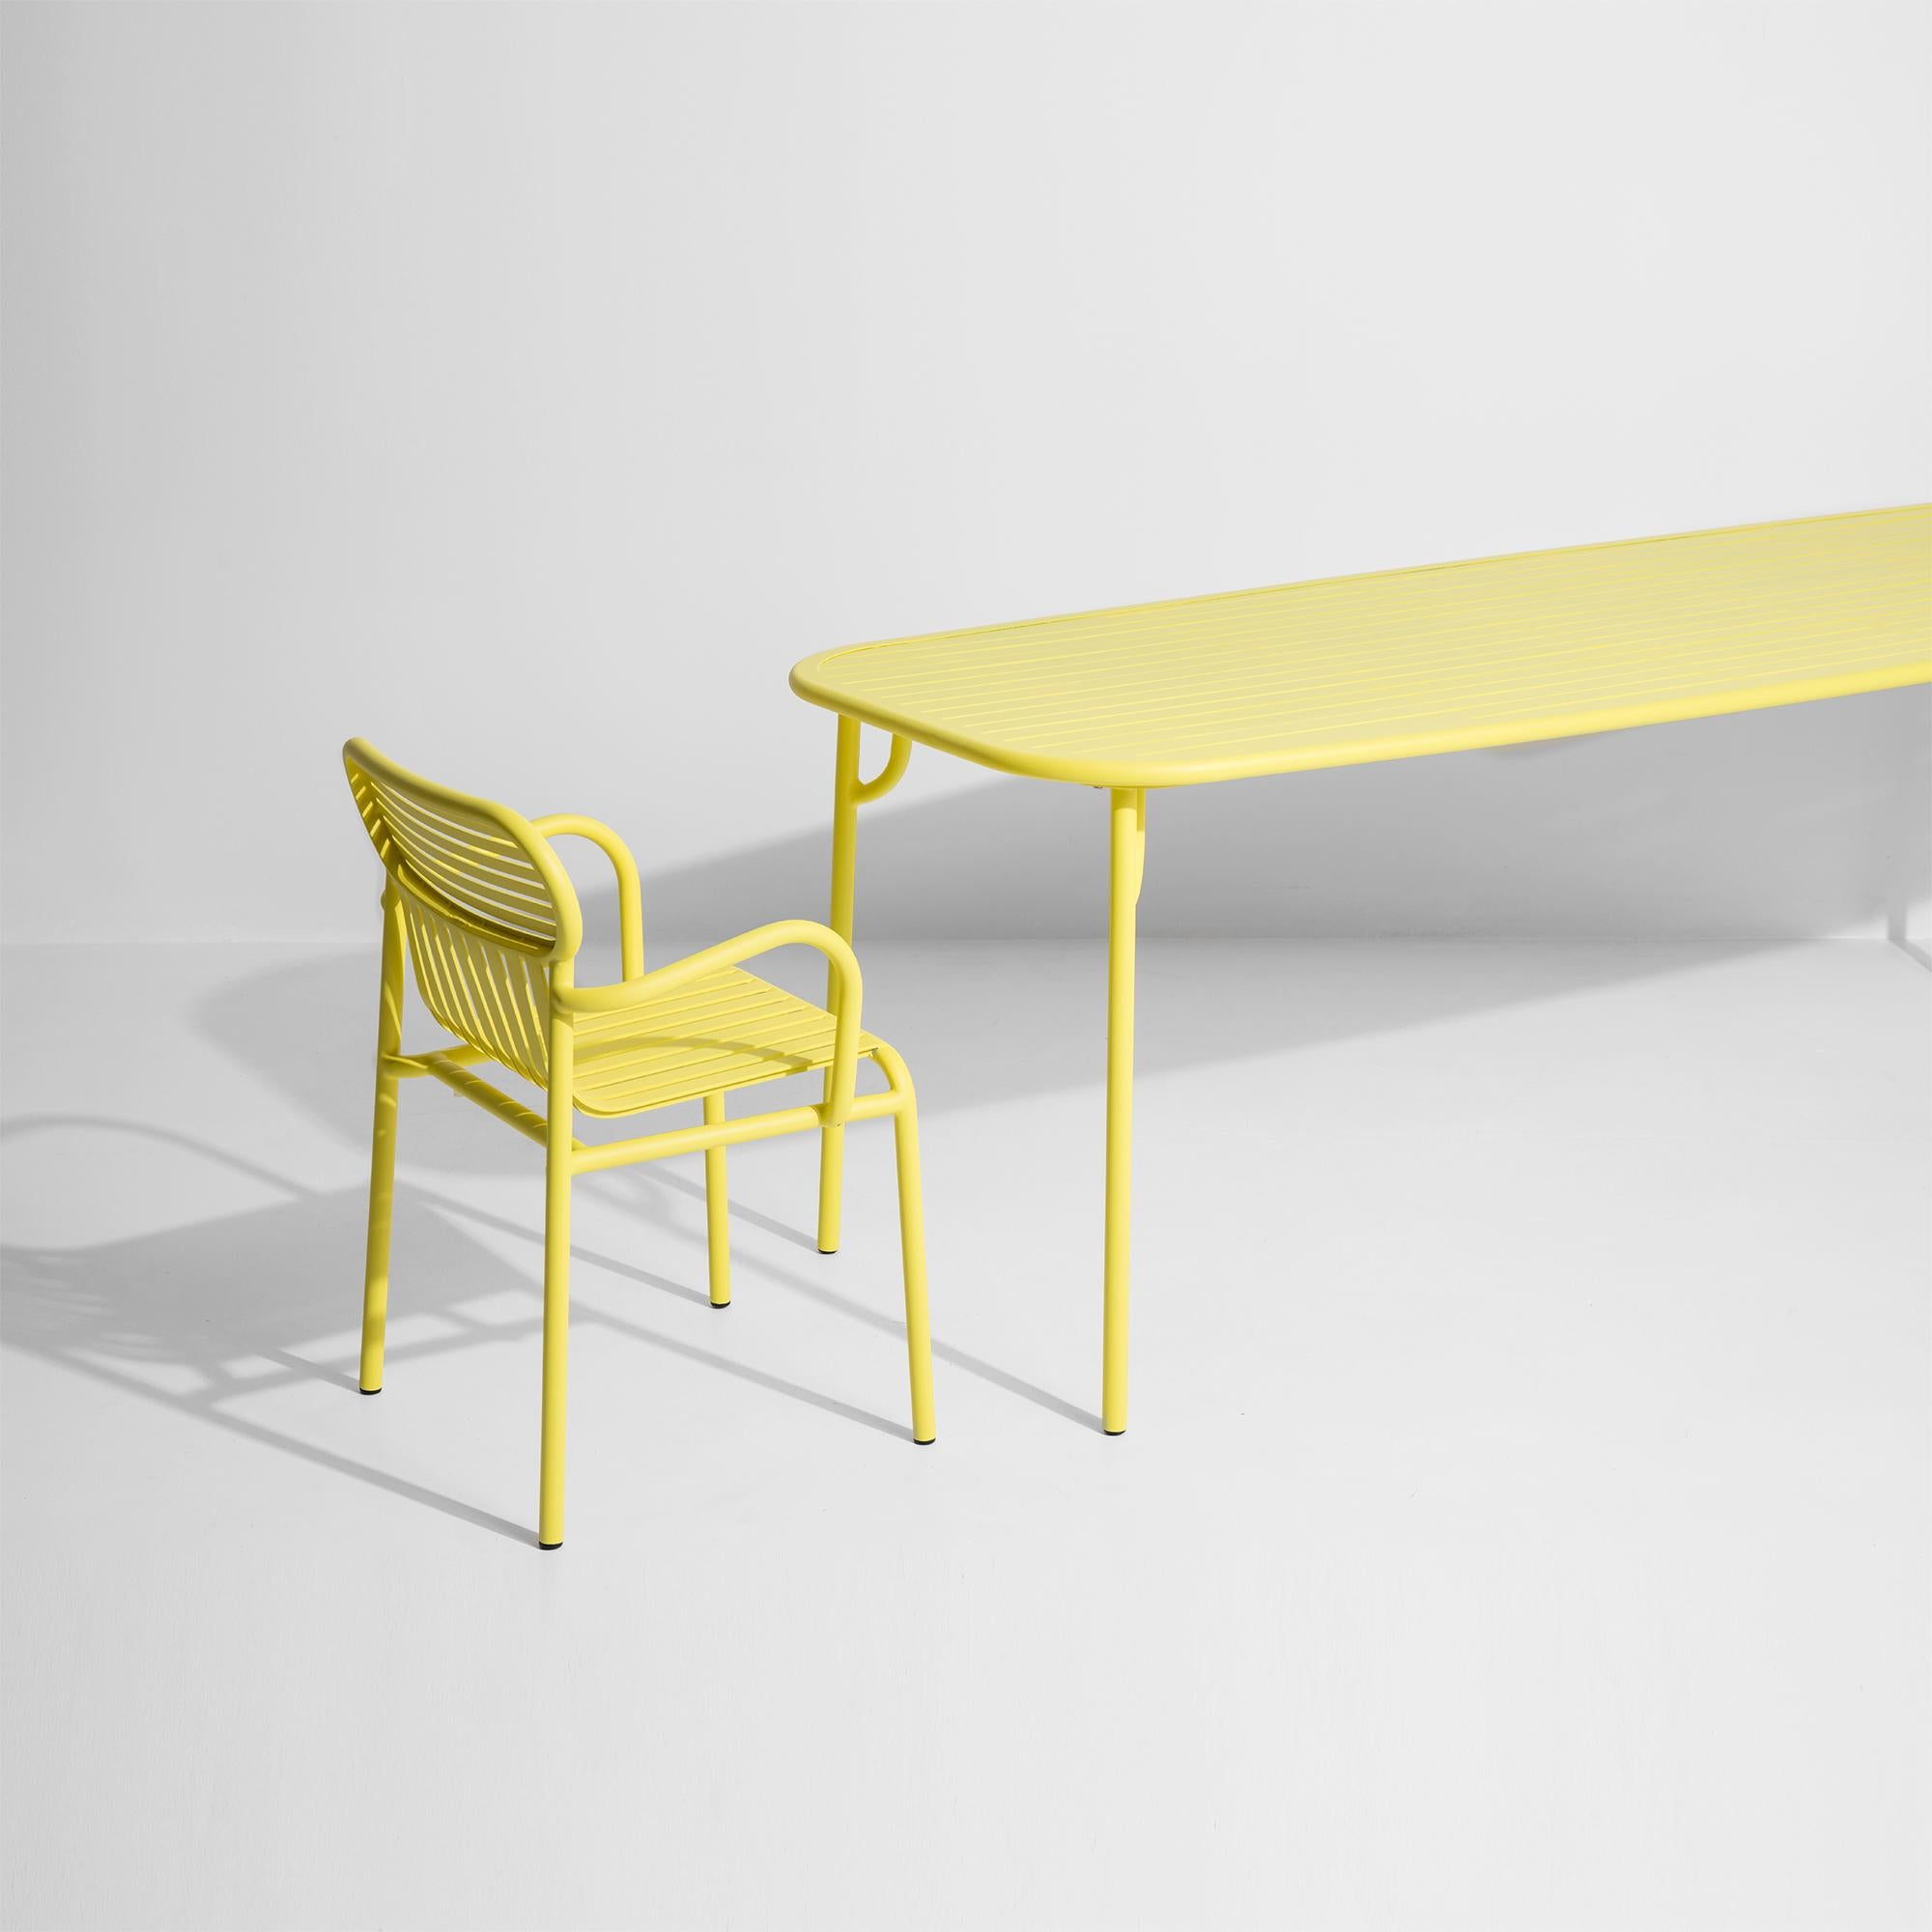 Petite Friture Week-End Medium Rectangular Dining Table in Yellow with Slats For Sale 4